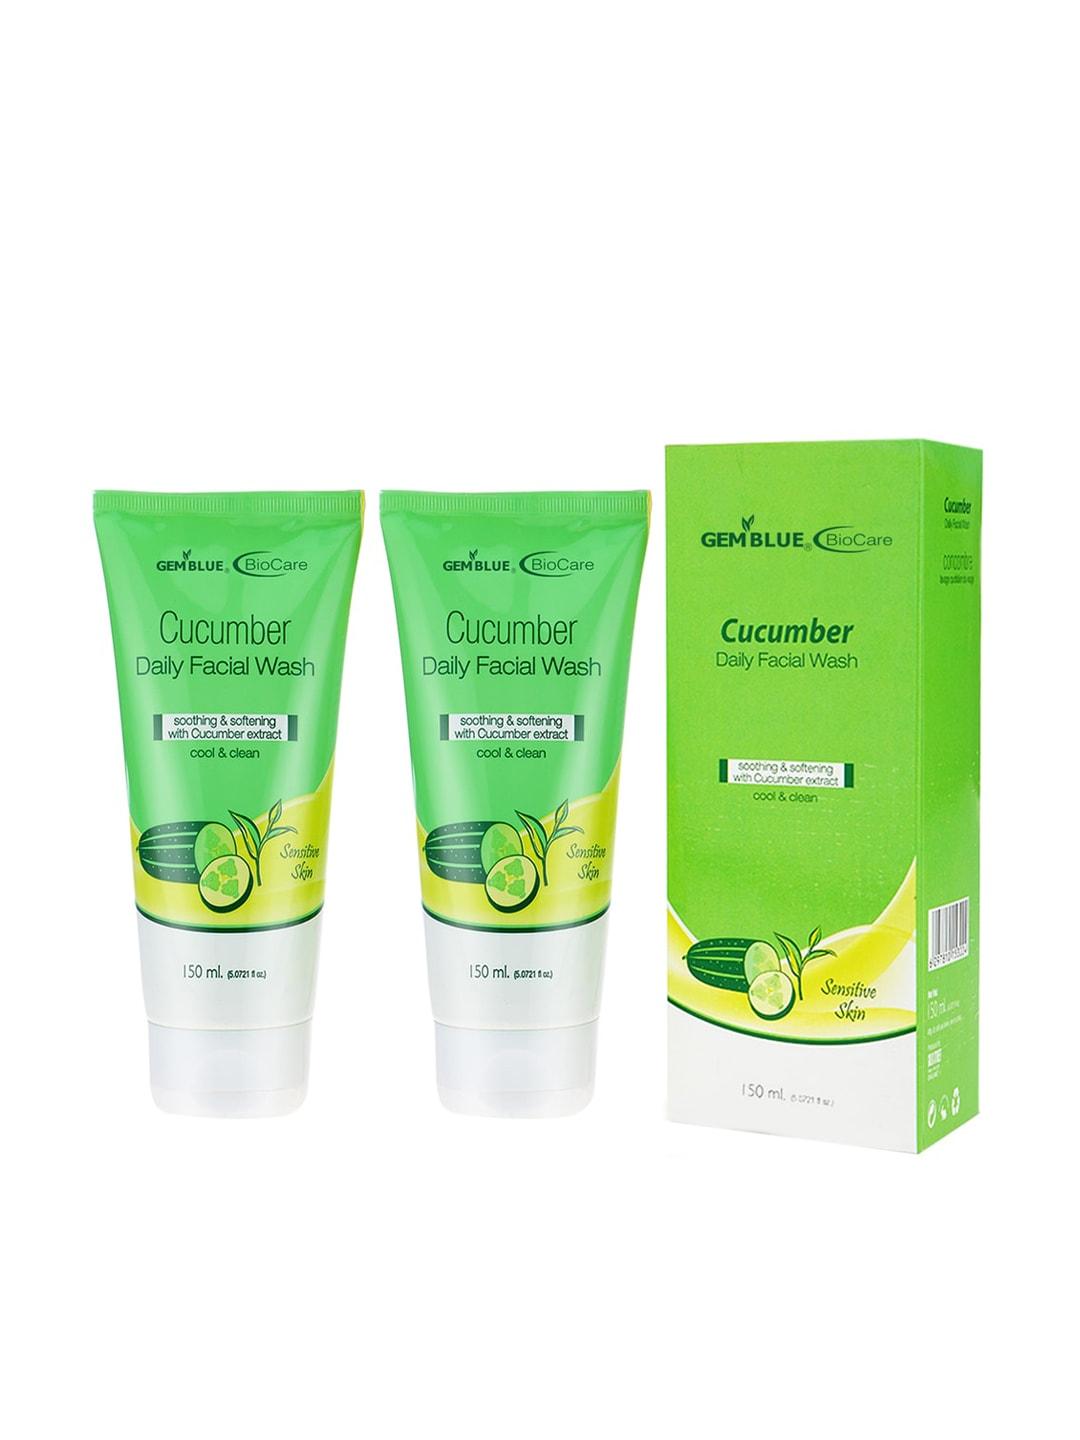 gemblue biocare unisex cucumber daily face wash, 150 ml each (combo of 2)